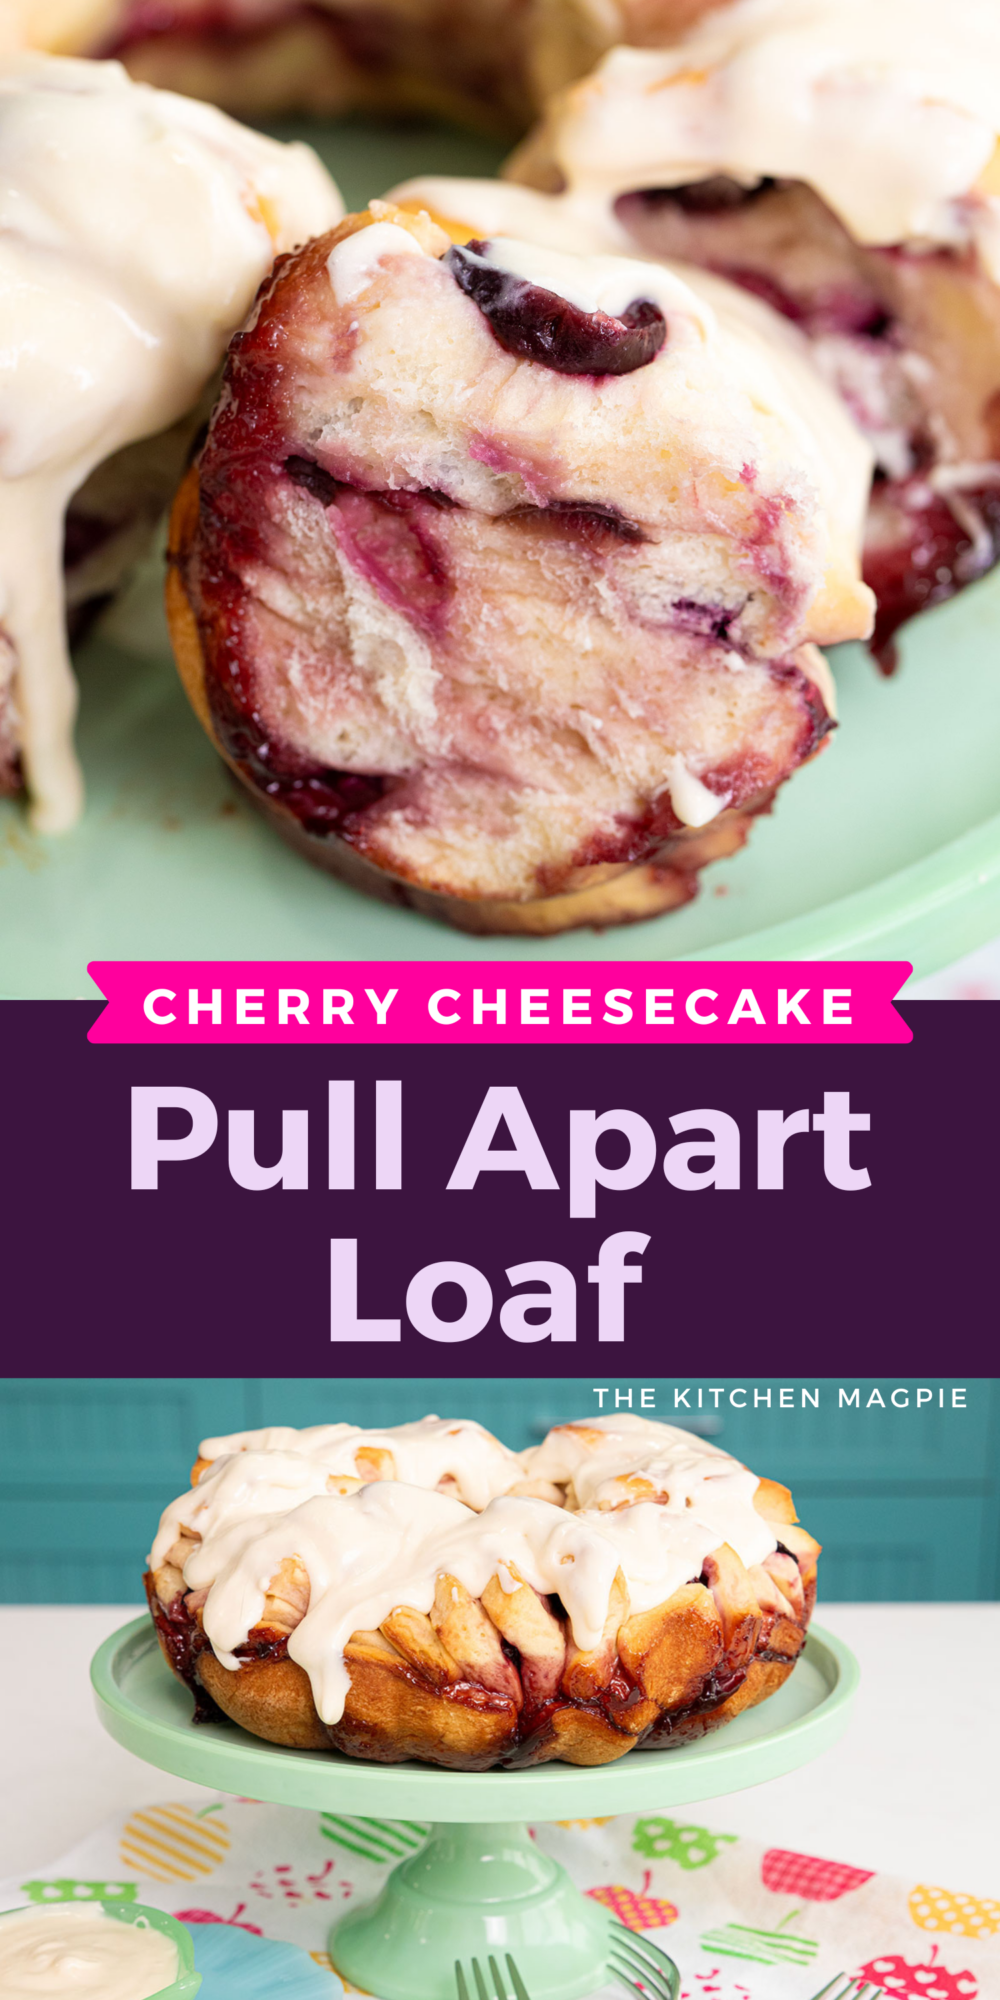 Delicious, easy to make Cherry Cheesecake Pull Apart Loaf!